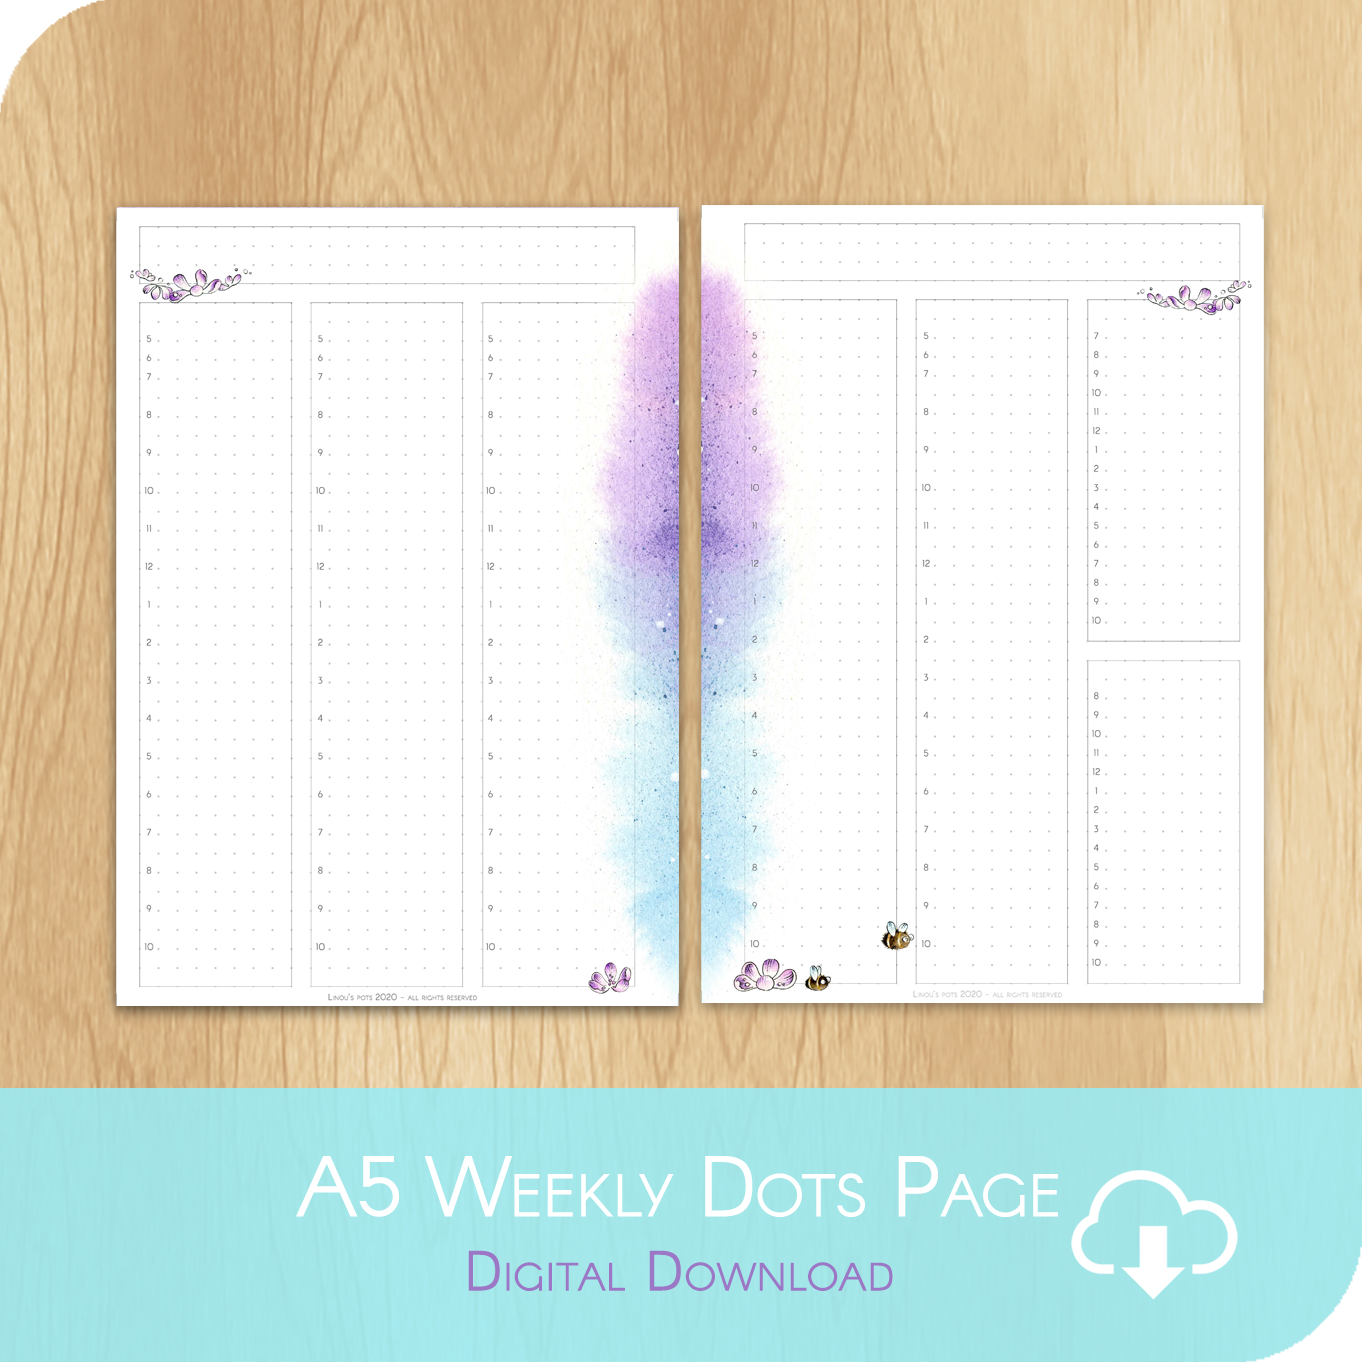 Buzzing In The Rain - Printable A5 Dots Hourly Page - 1 Week on 2 Pages